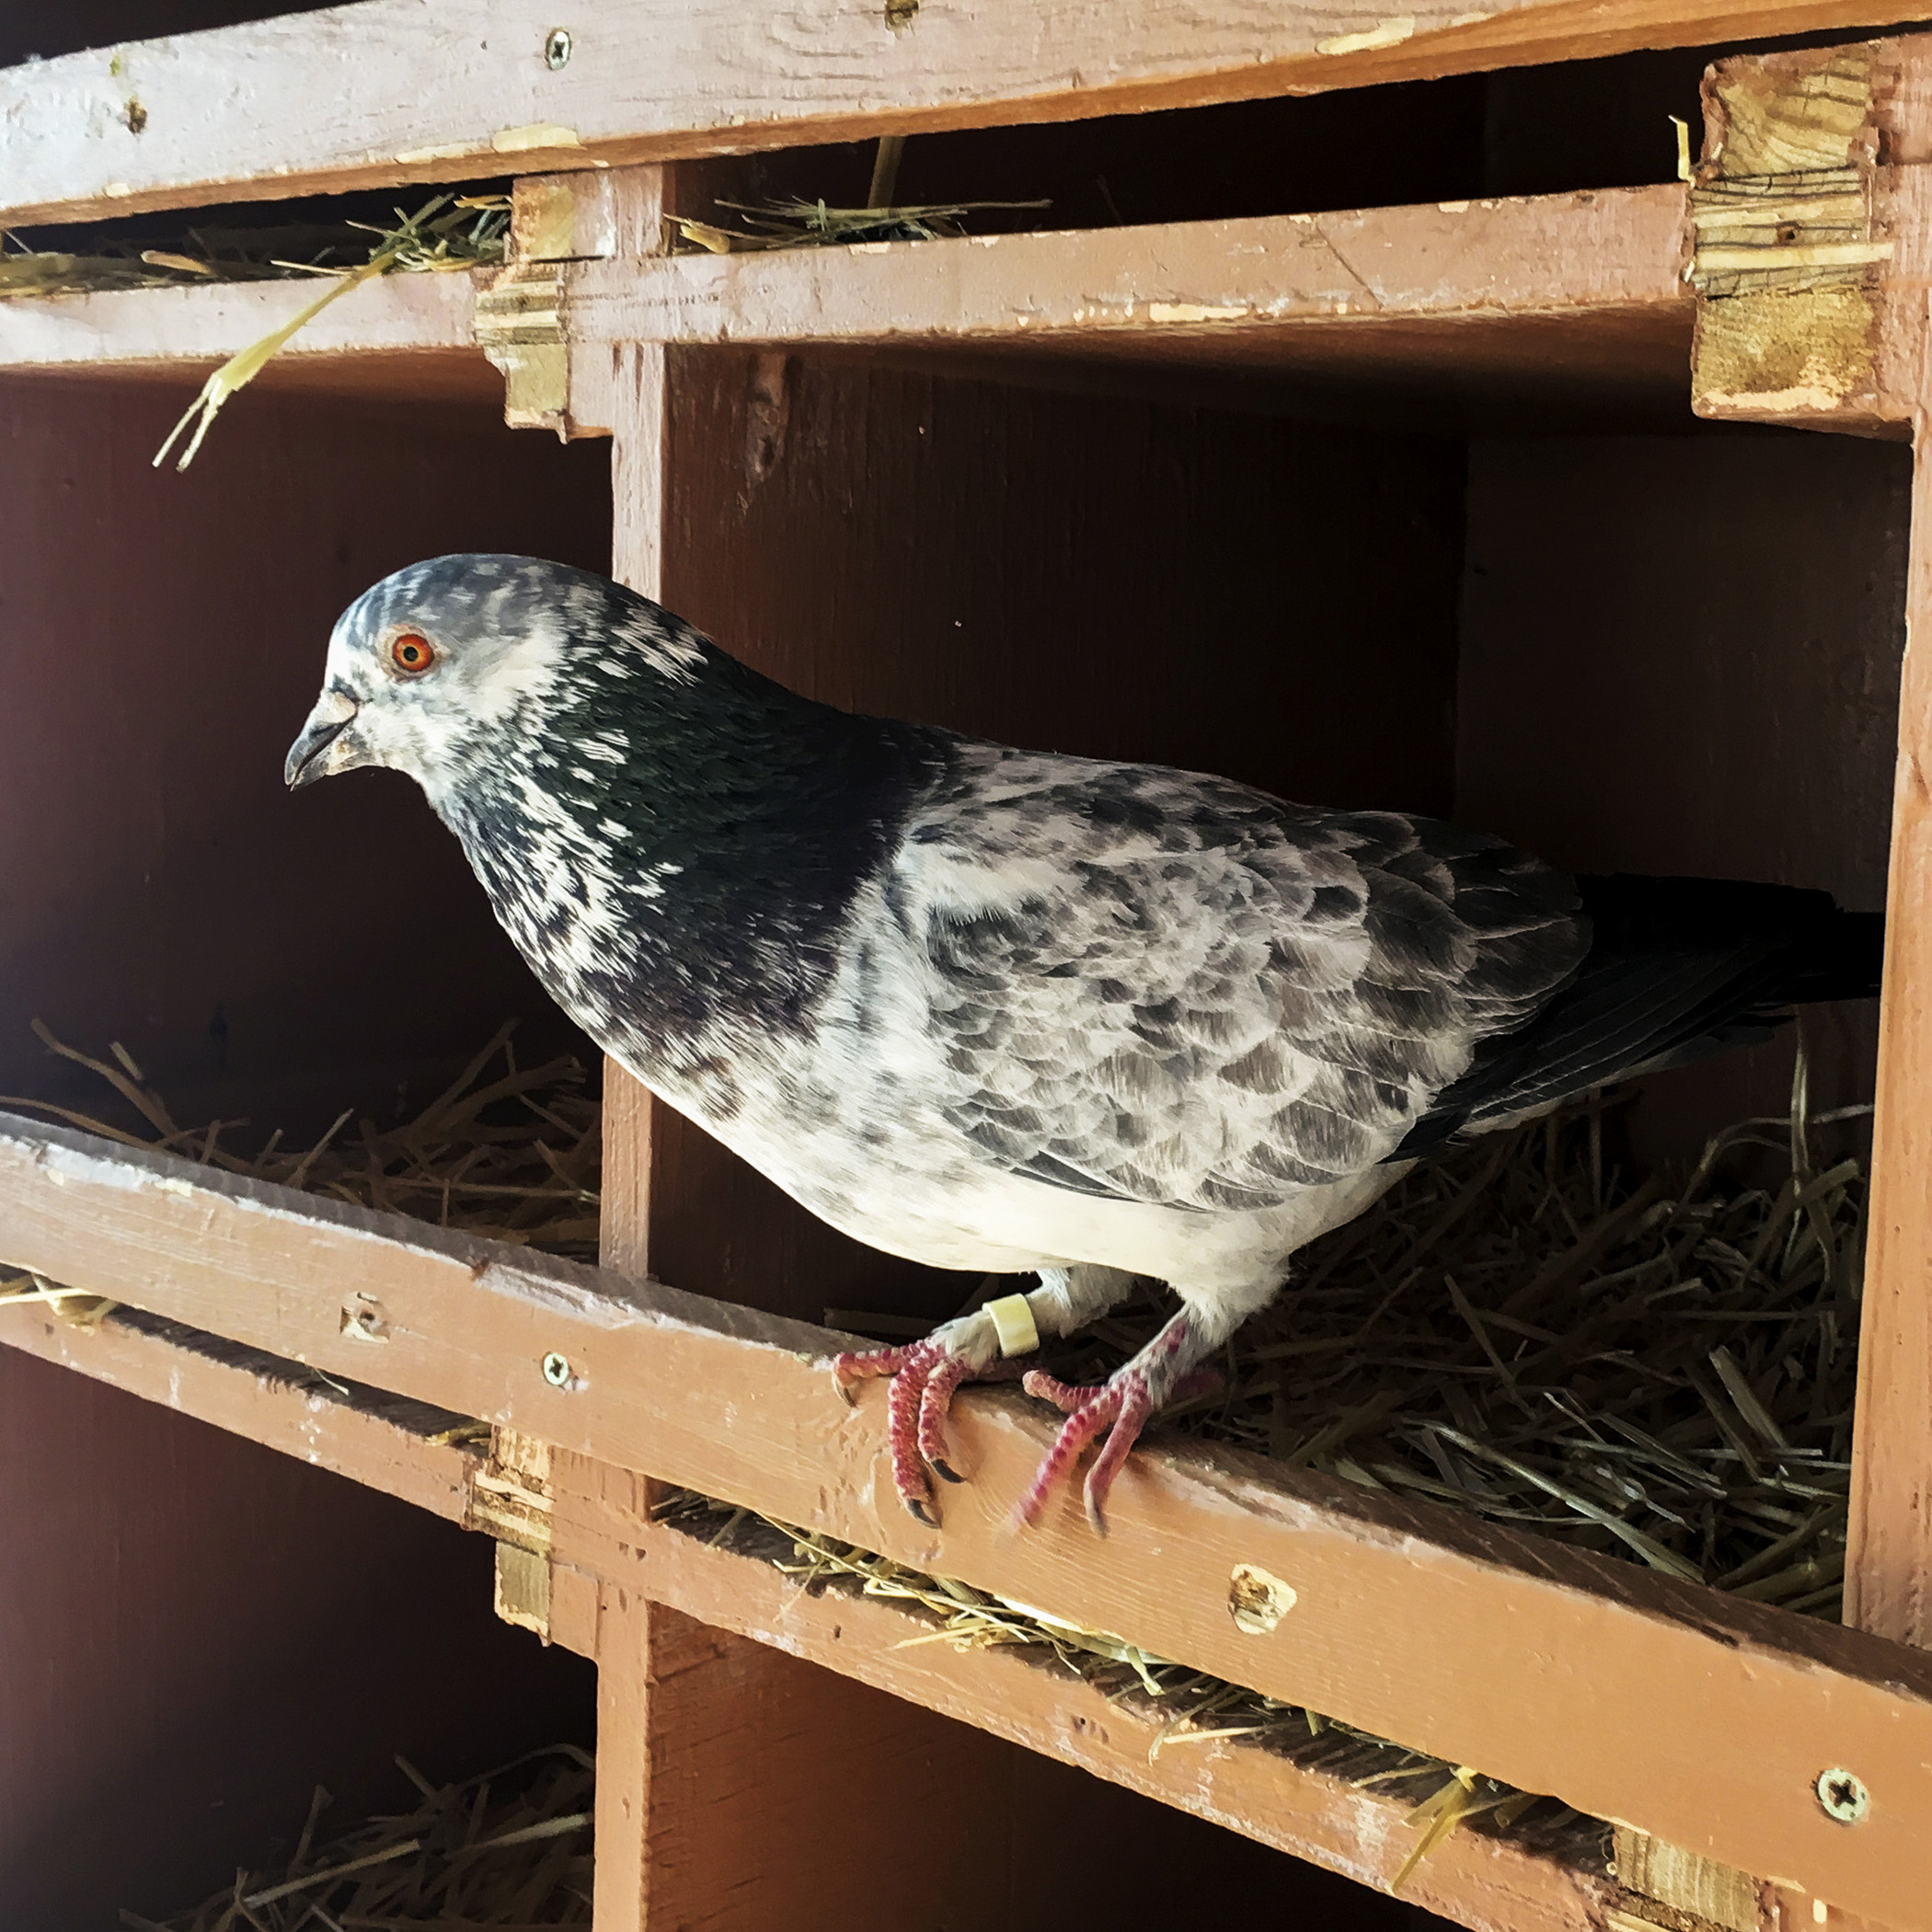  It’s common for injured pigeons, doves and other birds to come to Wild Friends to be rehabilitated. If they can be, they will be released back into the wild. If their injury is too severe, and it would hinder their survival, then they will live out 